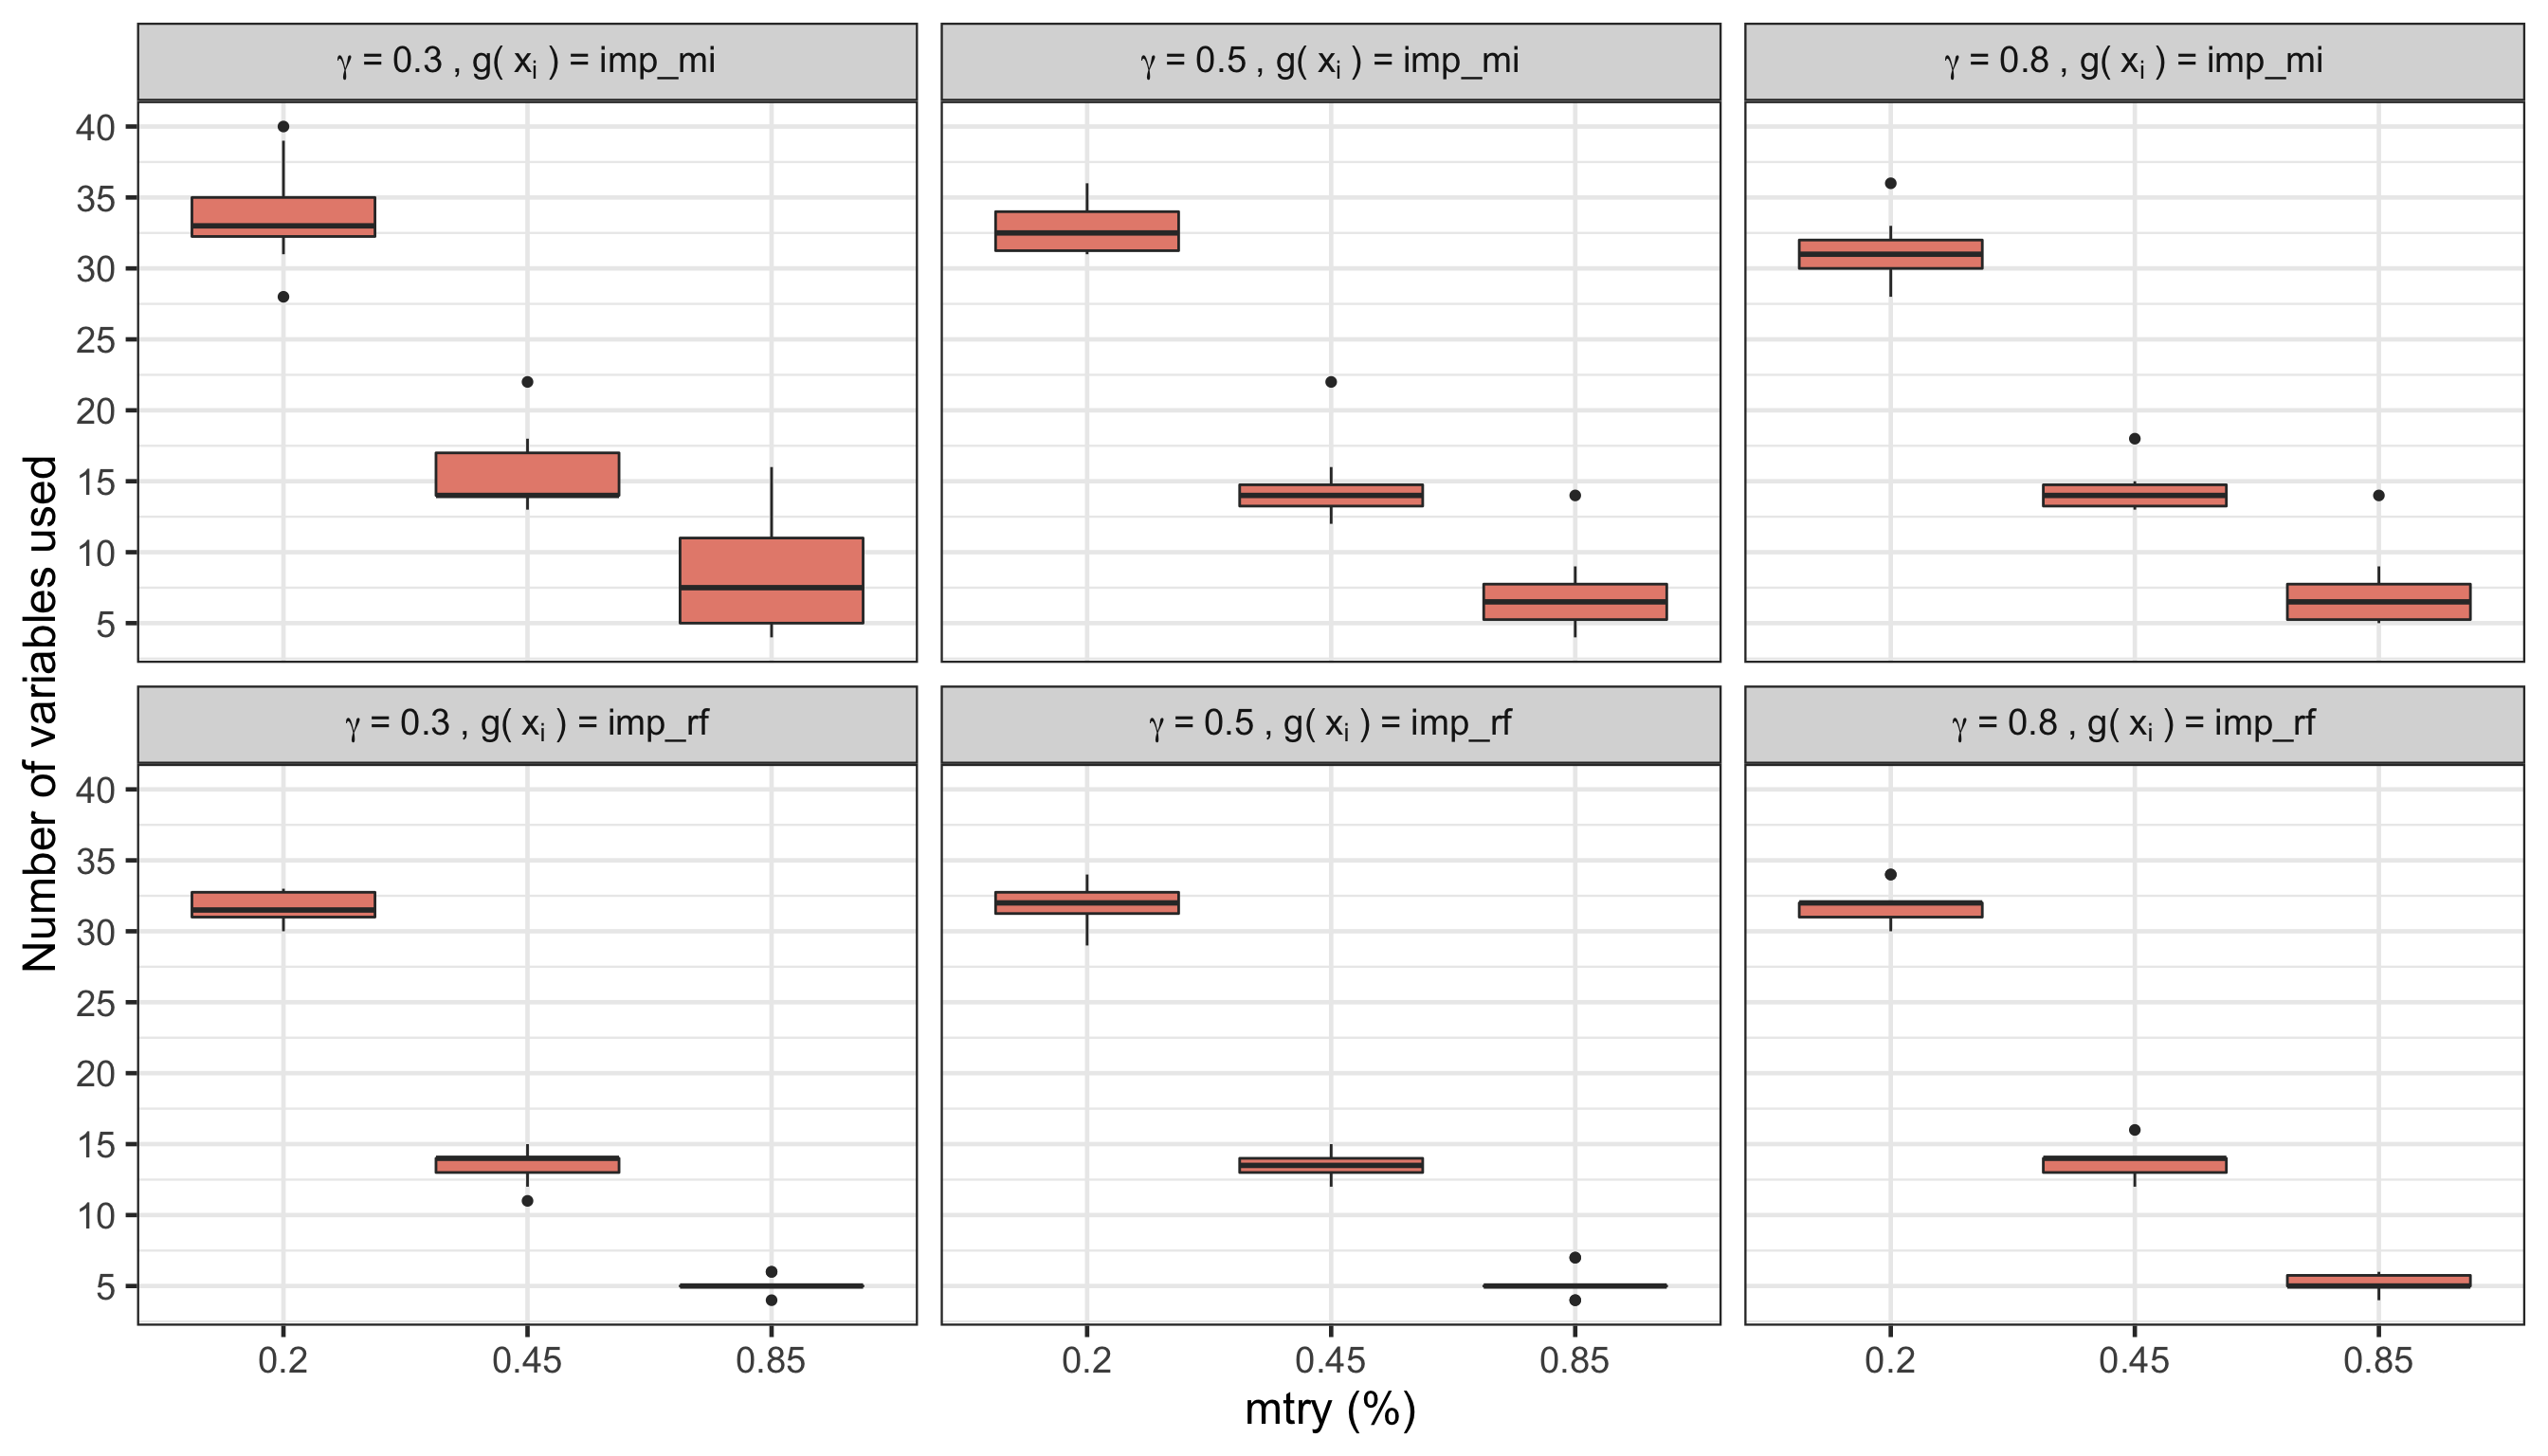 Figure 2. Final number of variables used for each combination of mtry, type of $g(\mathbf{x}_i)$, and $\gamma$